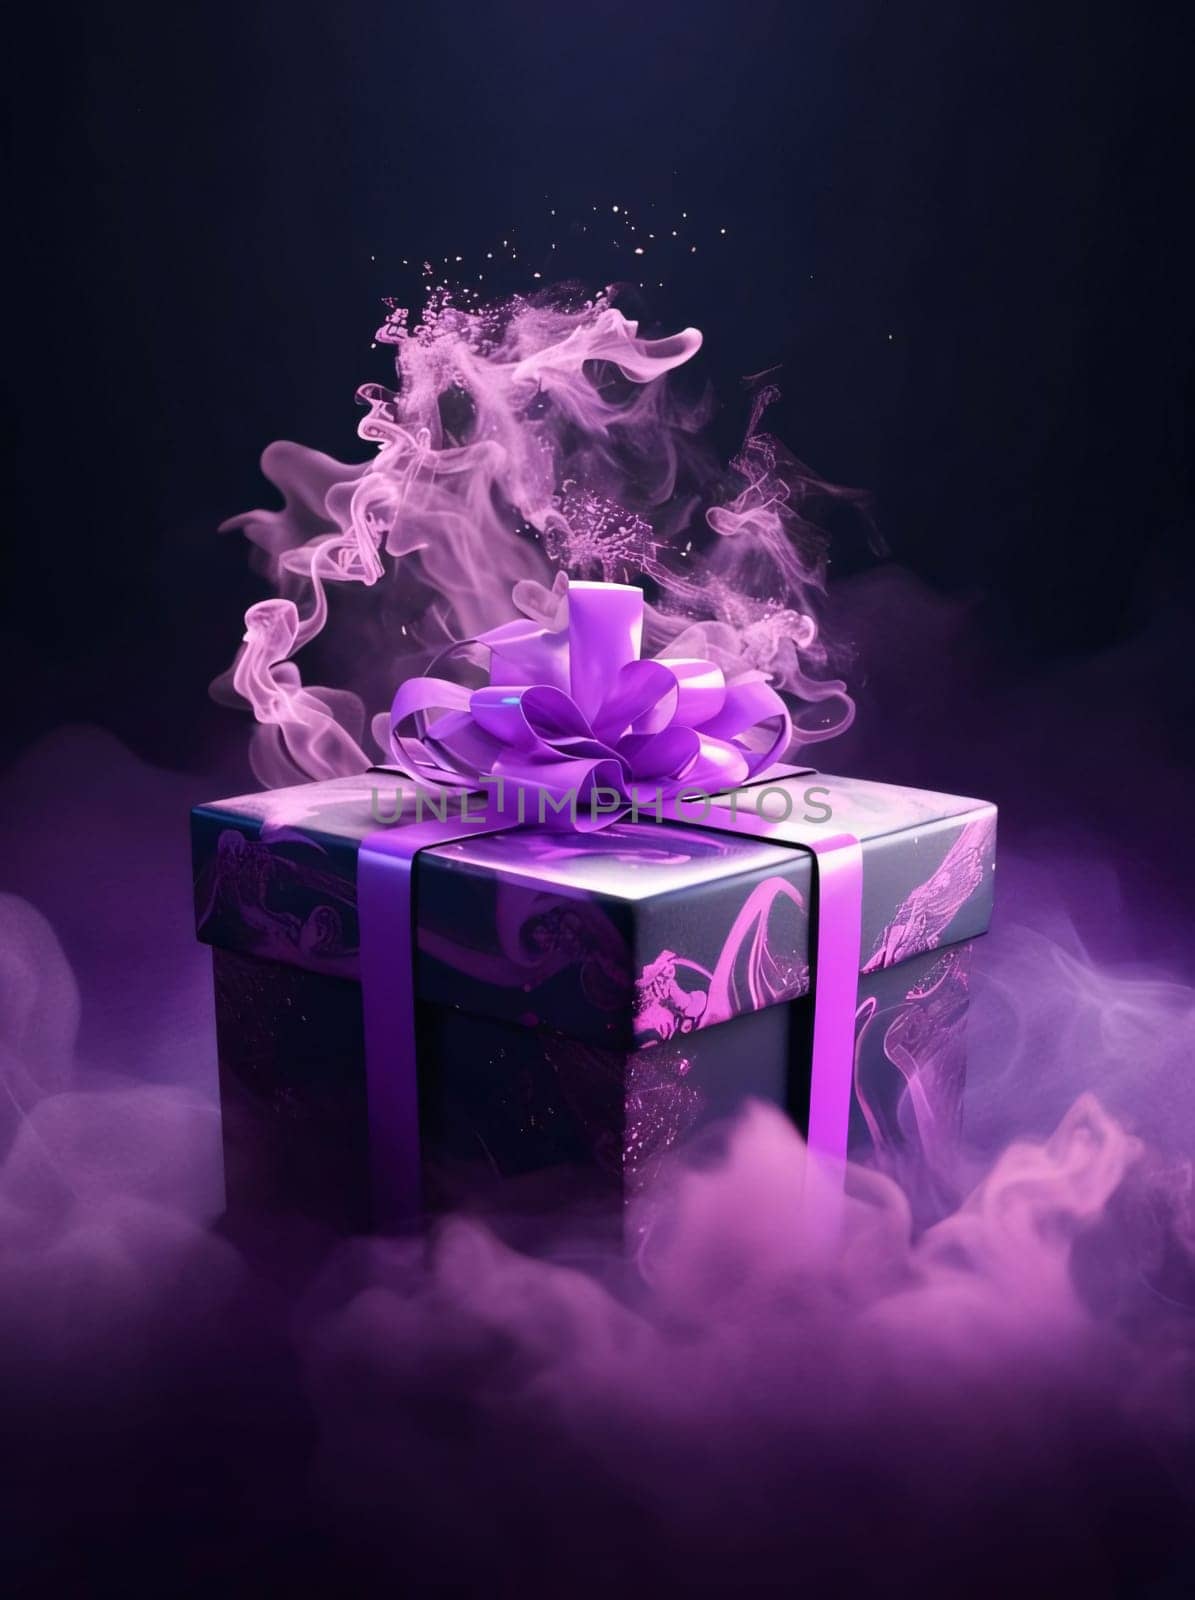 Black and purple gift, box, around purple smoke, purple bow, dark background. Gifts as a day symbol of present and love. A time of falling in love and love.